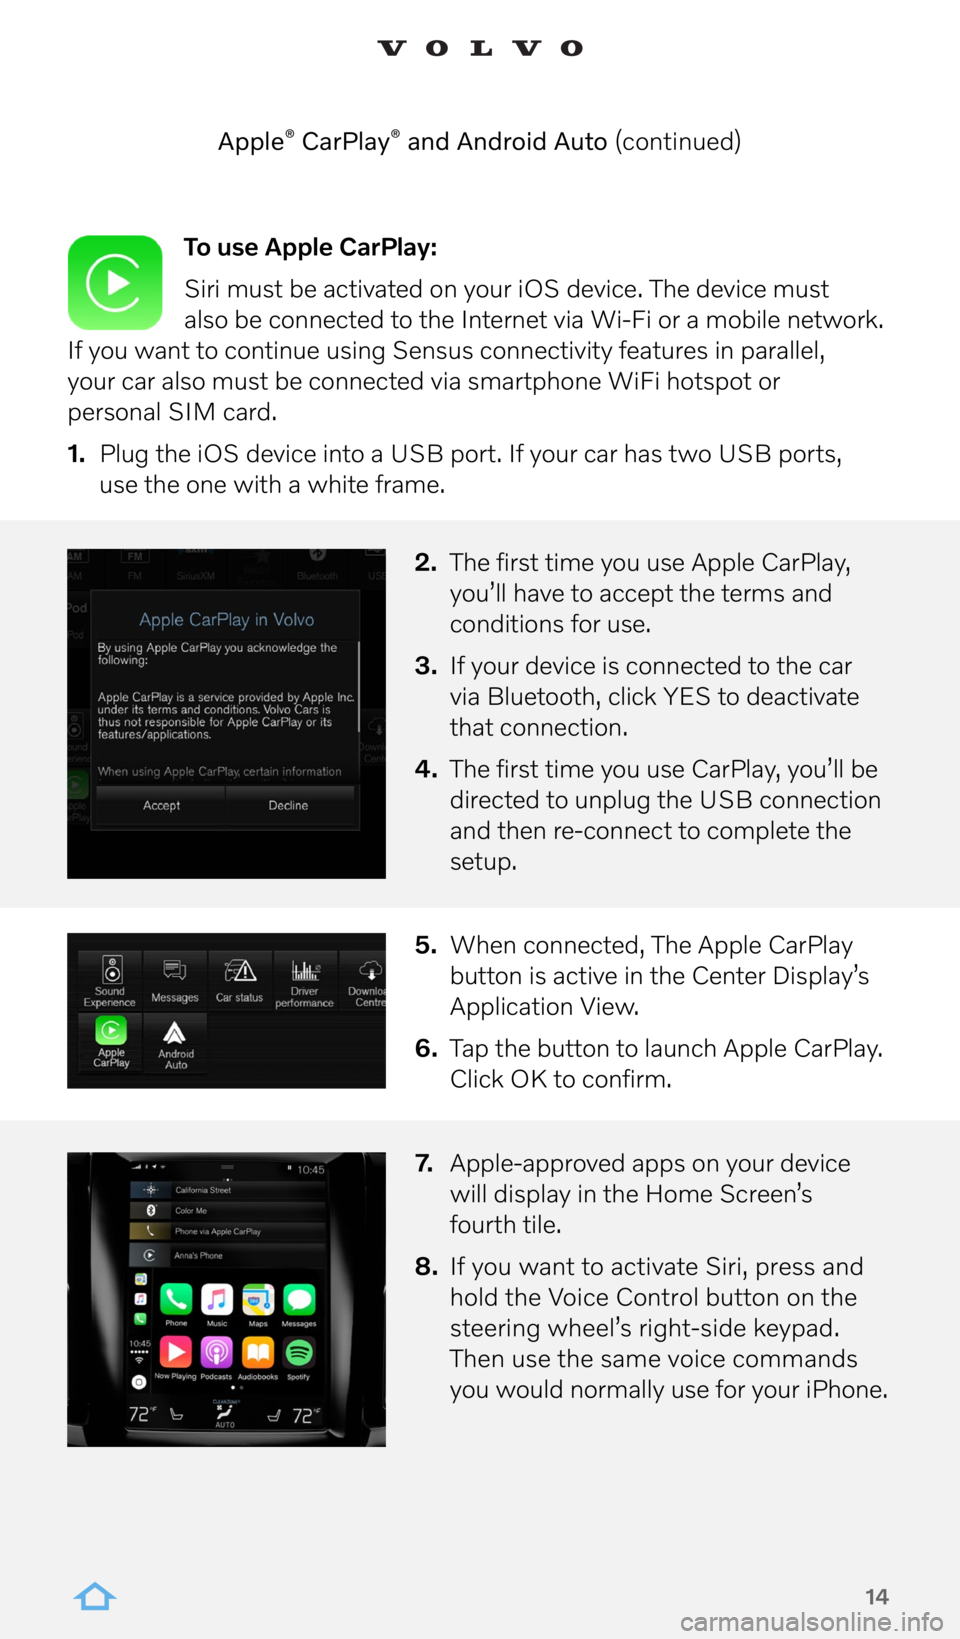 VOLVO XC90 2022  Sensus Digital Guide 14
To use Apple CarPlay:
Siri must be activated on your iOS device. The device must   
also be connected to the Internet via Wi-Fi or a mobile network. 
If you want to continue using Sensus connectivi